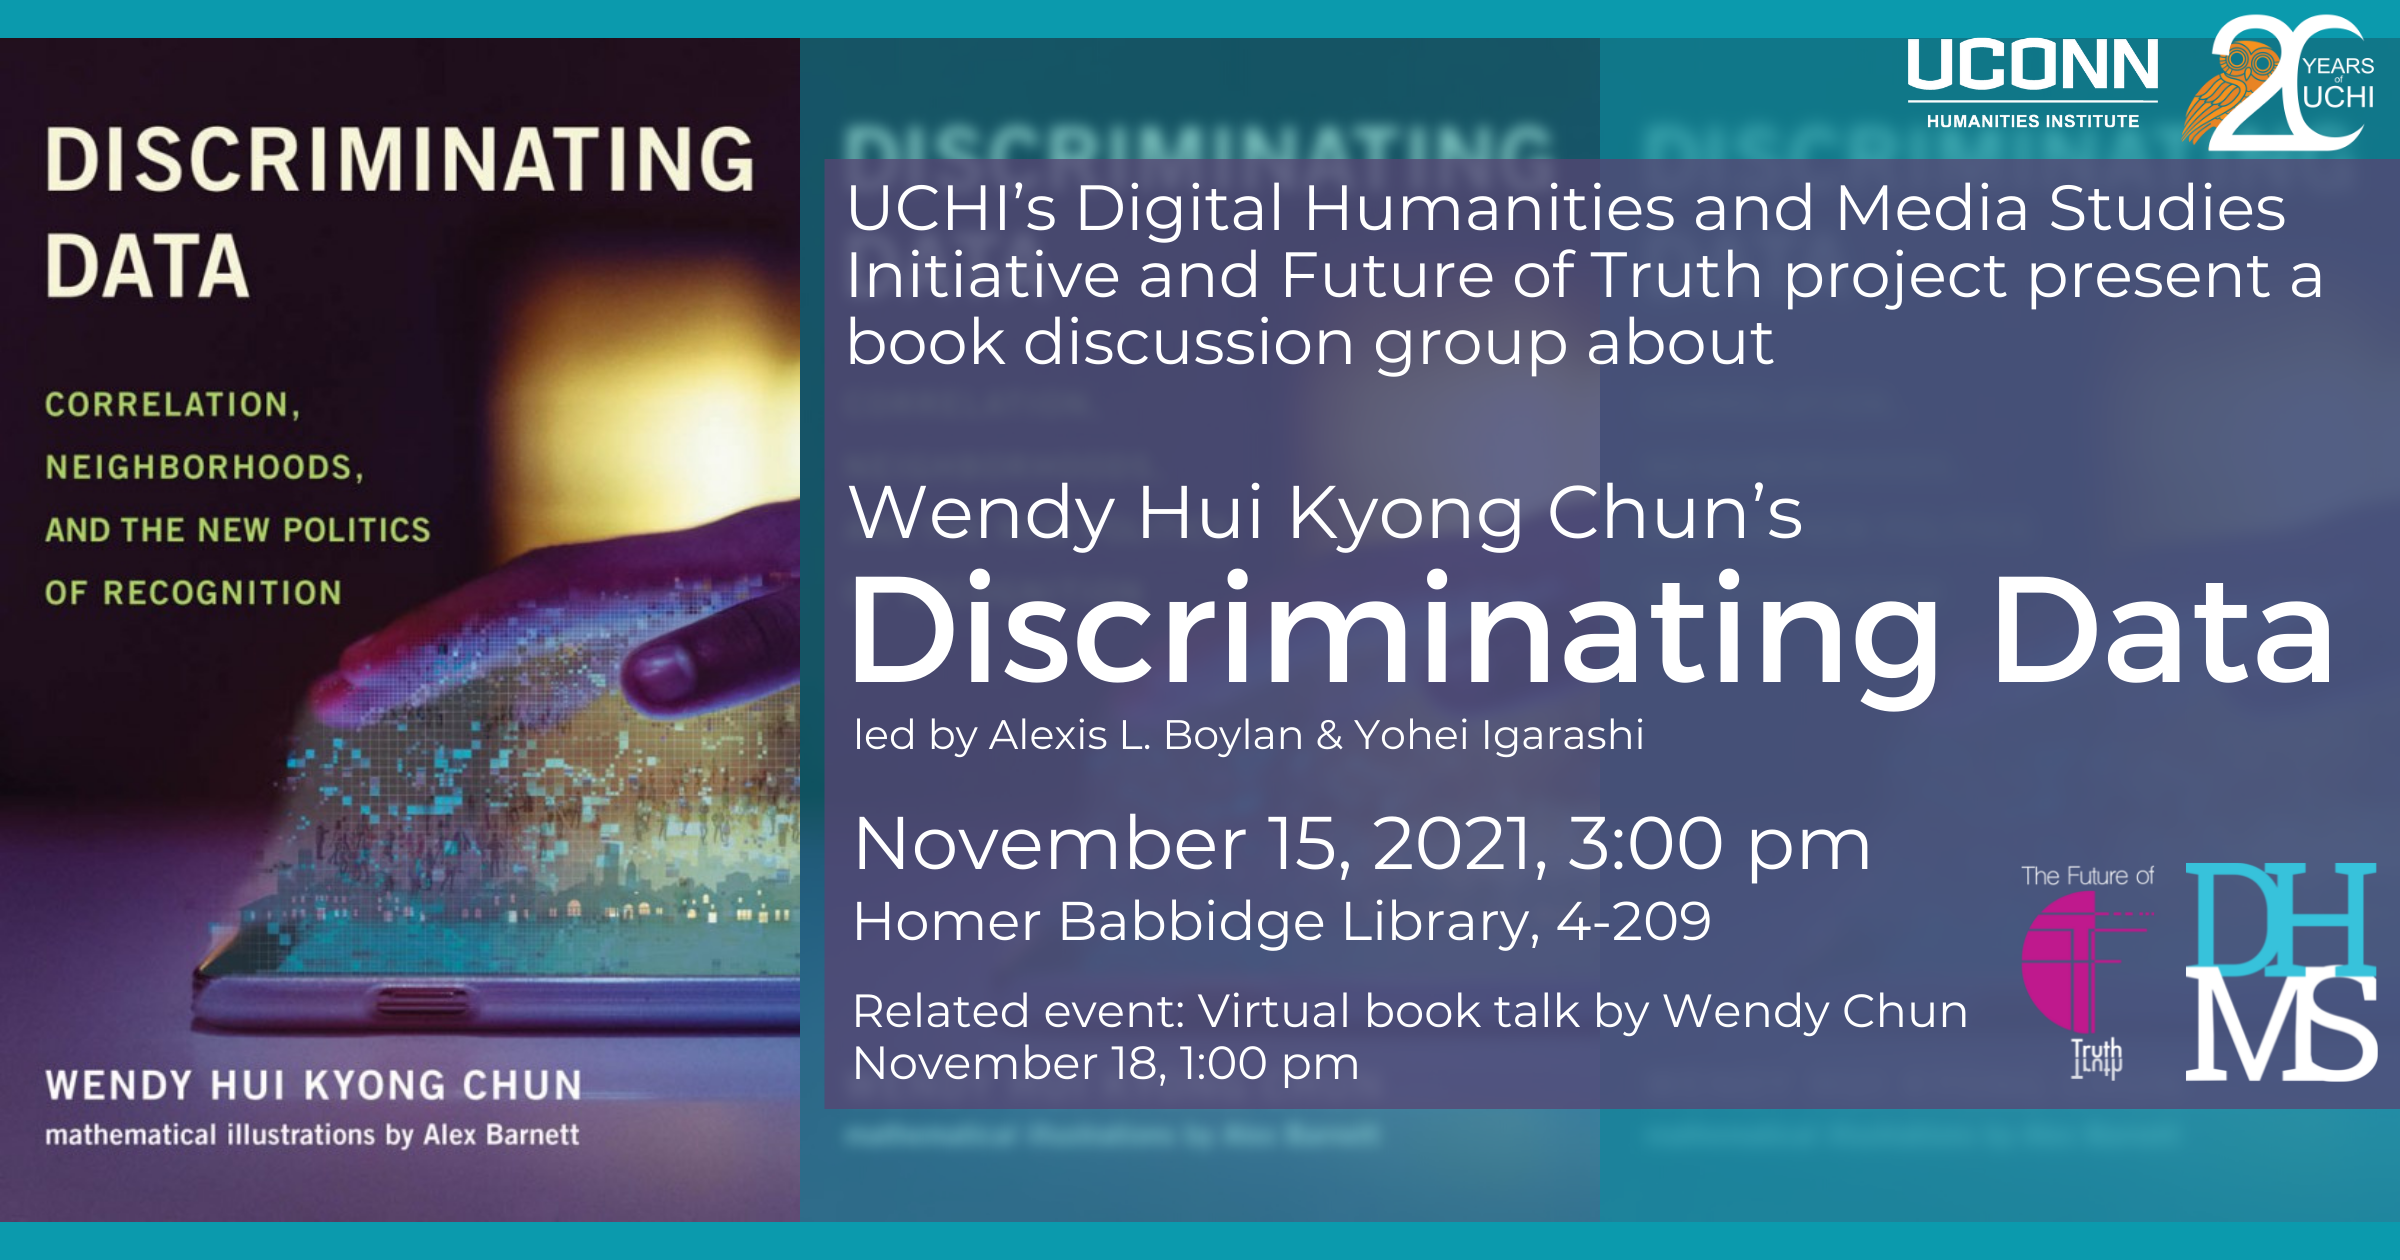 UCHI's digital humanities and media studies initiative and future of truth project present a book discussion group about Wendy Hui Kyong Chun's Discriminating Data, led by Alexis L. Boylan and Yohei Igarashi. November 15, 2021, 3:00pm. Homer Babbidge Library, 4-209. Related event: virtual book talk by Wendy Chun, November 18, 2021, 1:00pm